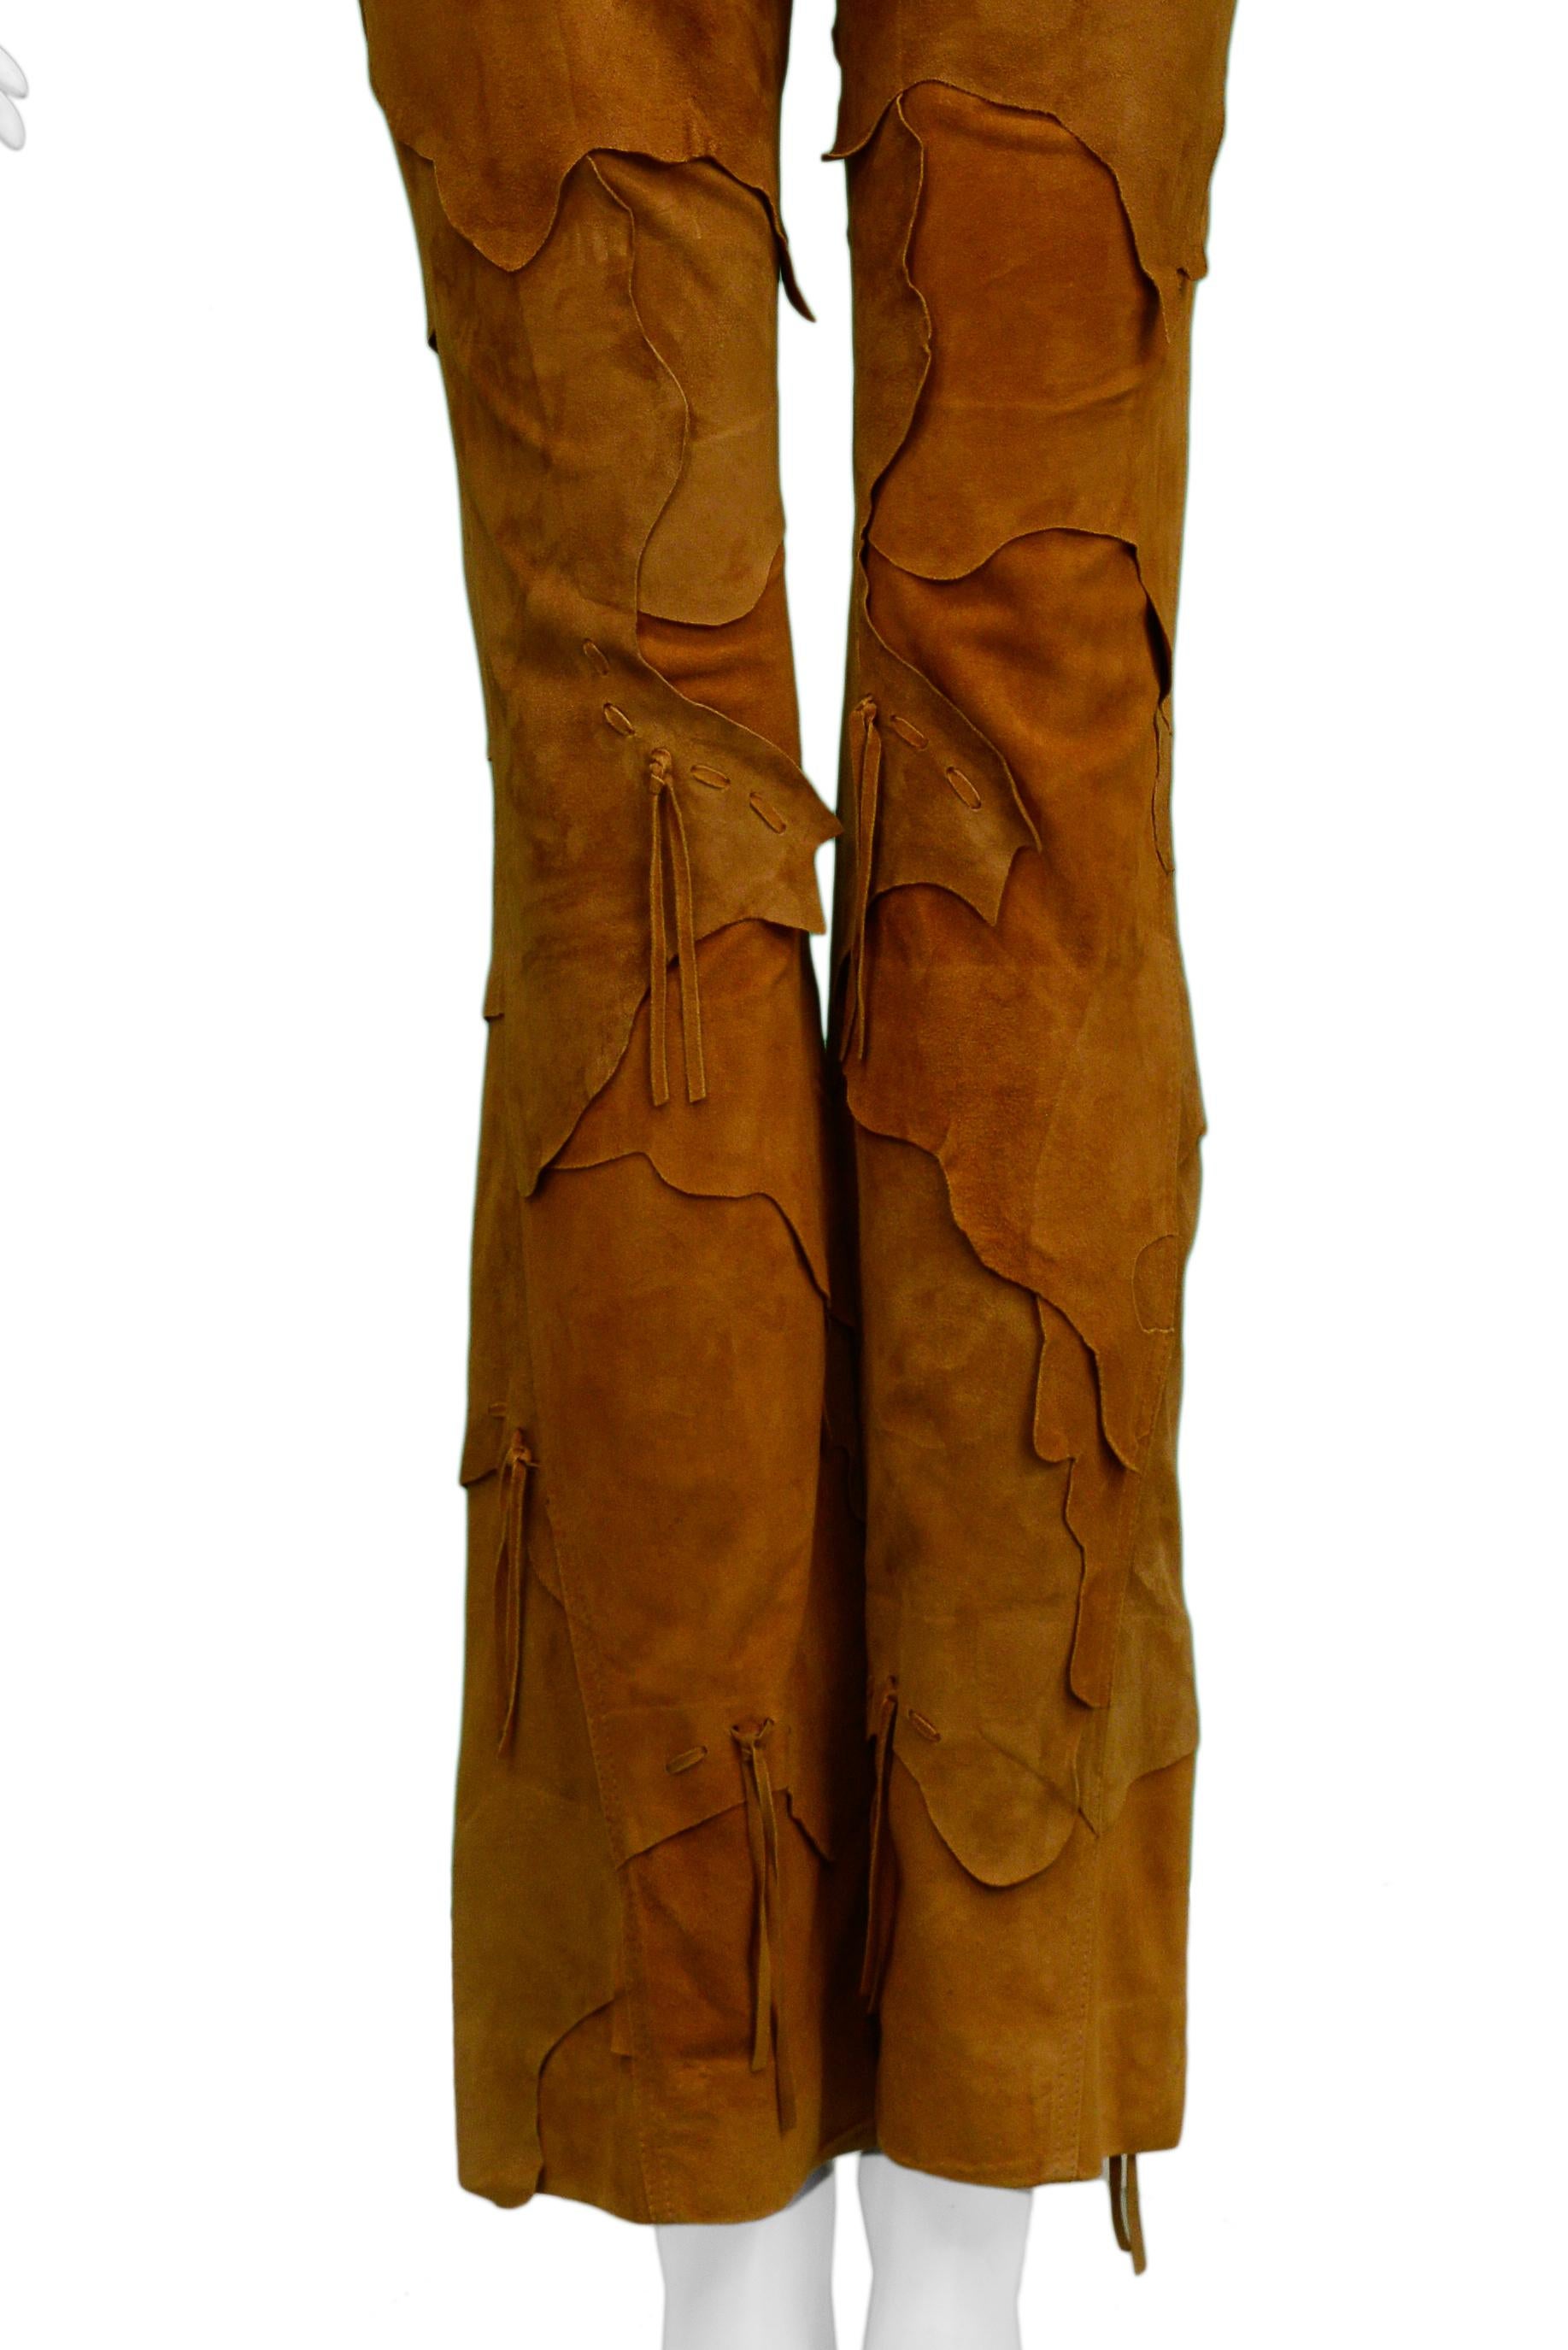 Vintage Christian Dior By Galliano Brown Suede Patchwork Leather Pants 2001 2